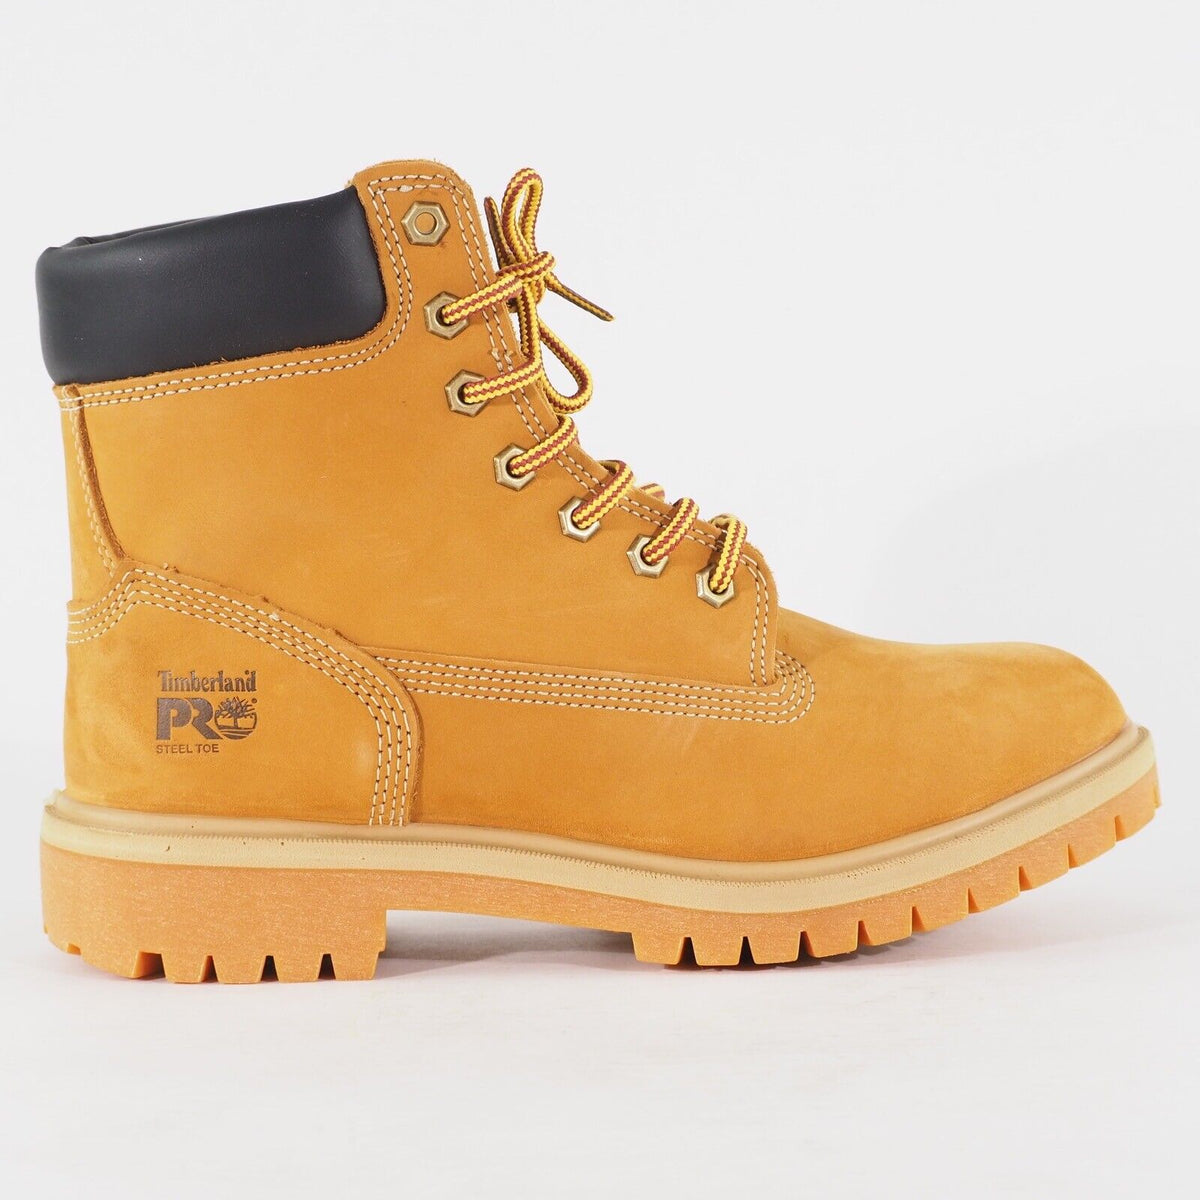 Womens Timberland 6 Inch Safety Boots A1KK6 Wheat Leather Steel Toe Safety Boots